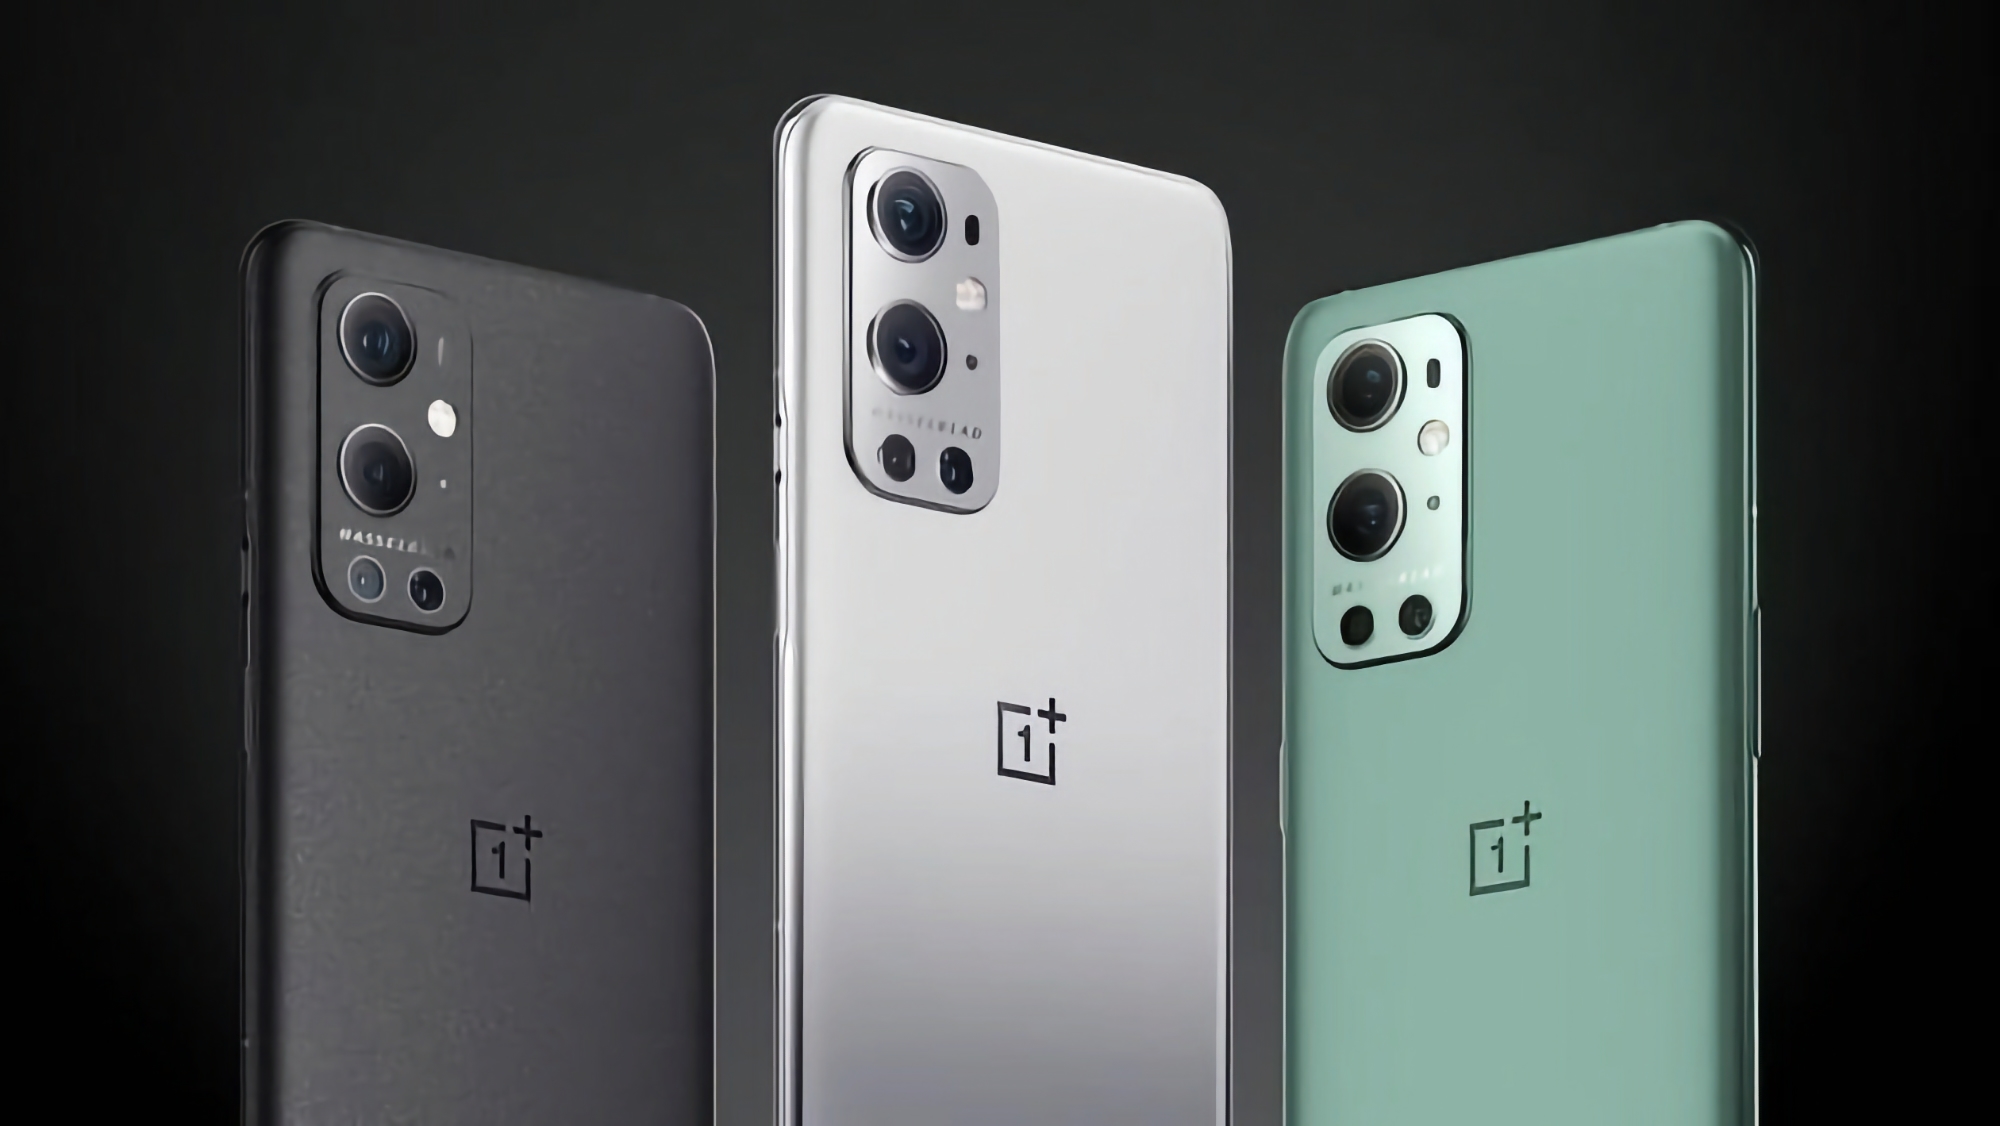 OnePlus 9, OnePlus 9 Pro and OnePlus 9RT have received OxygenOS 14.0.0.500